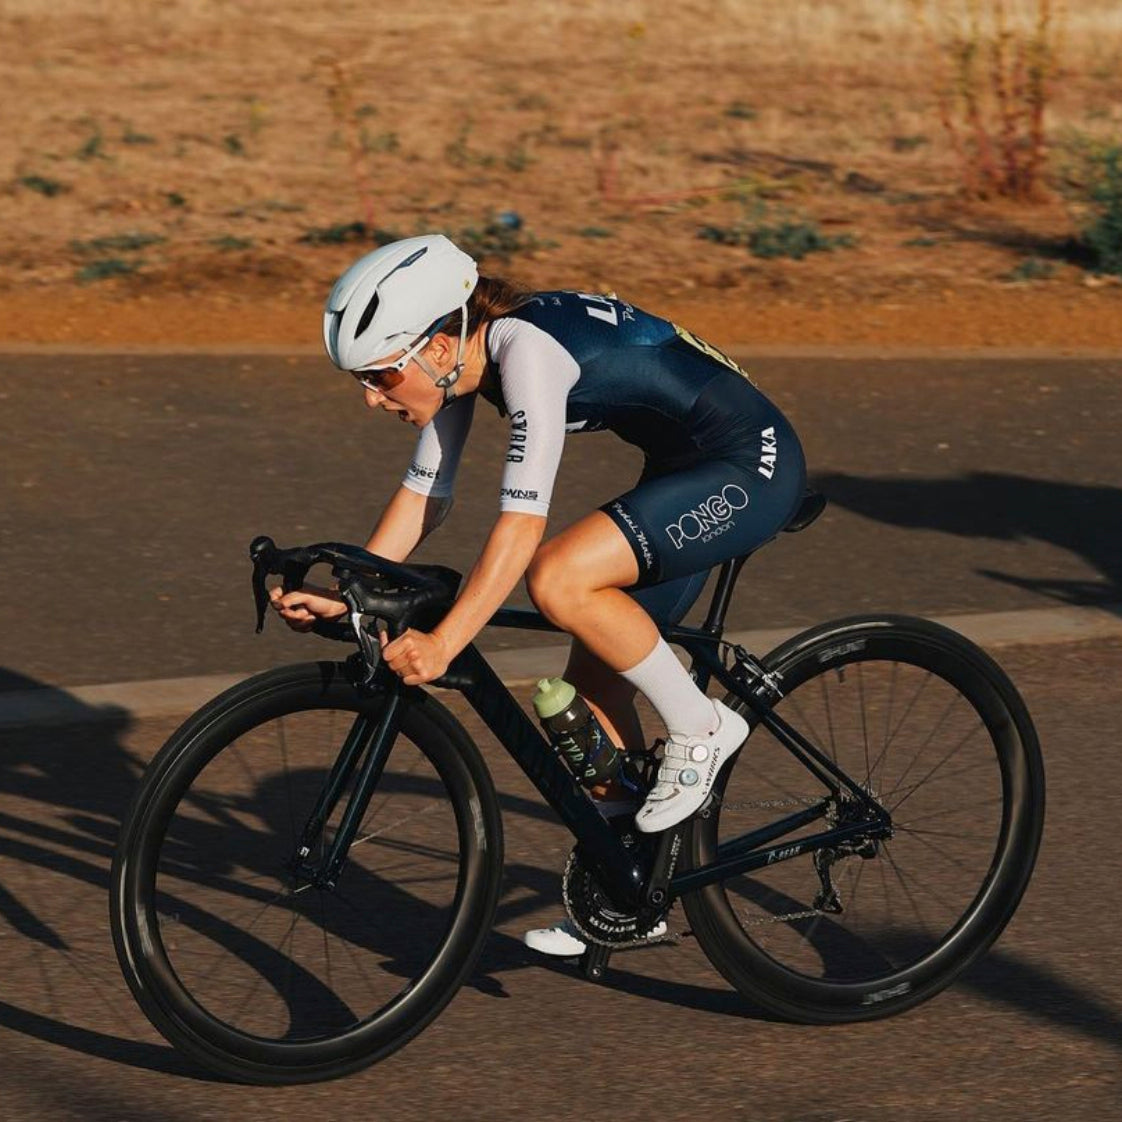 female cyclist cycling in race with full cycle gear